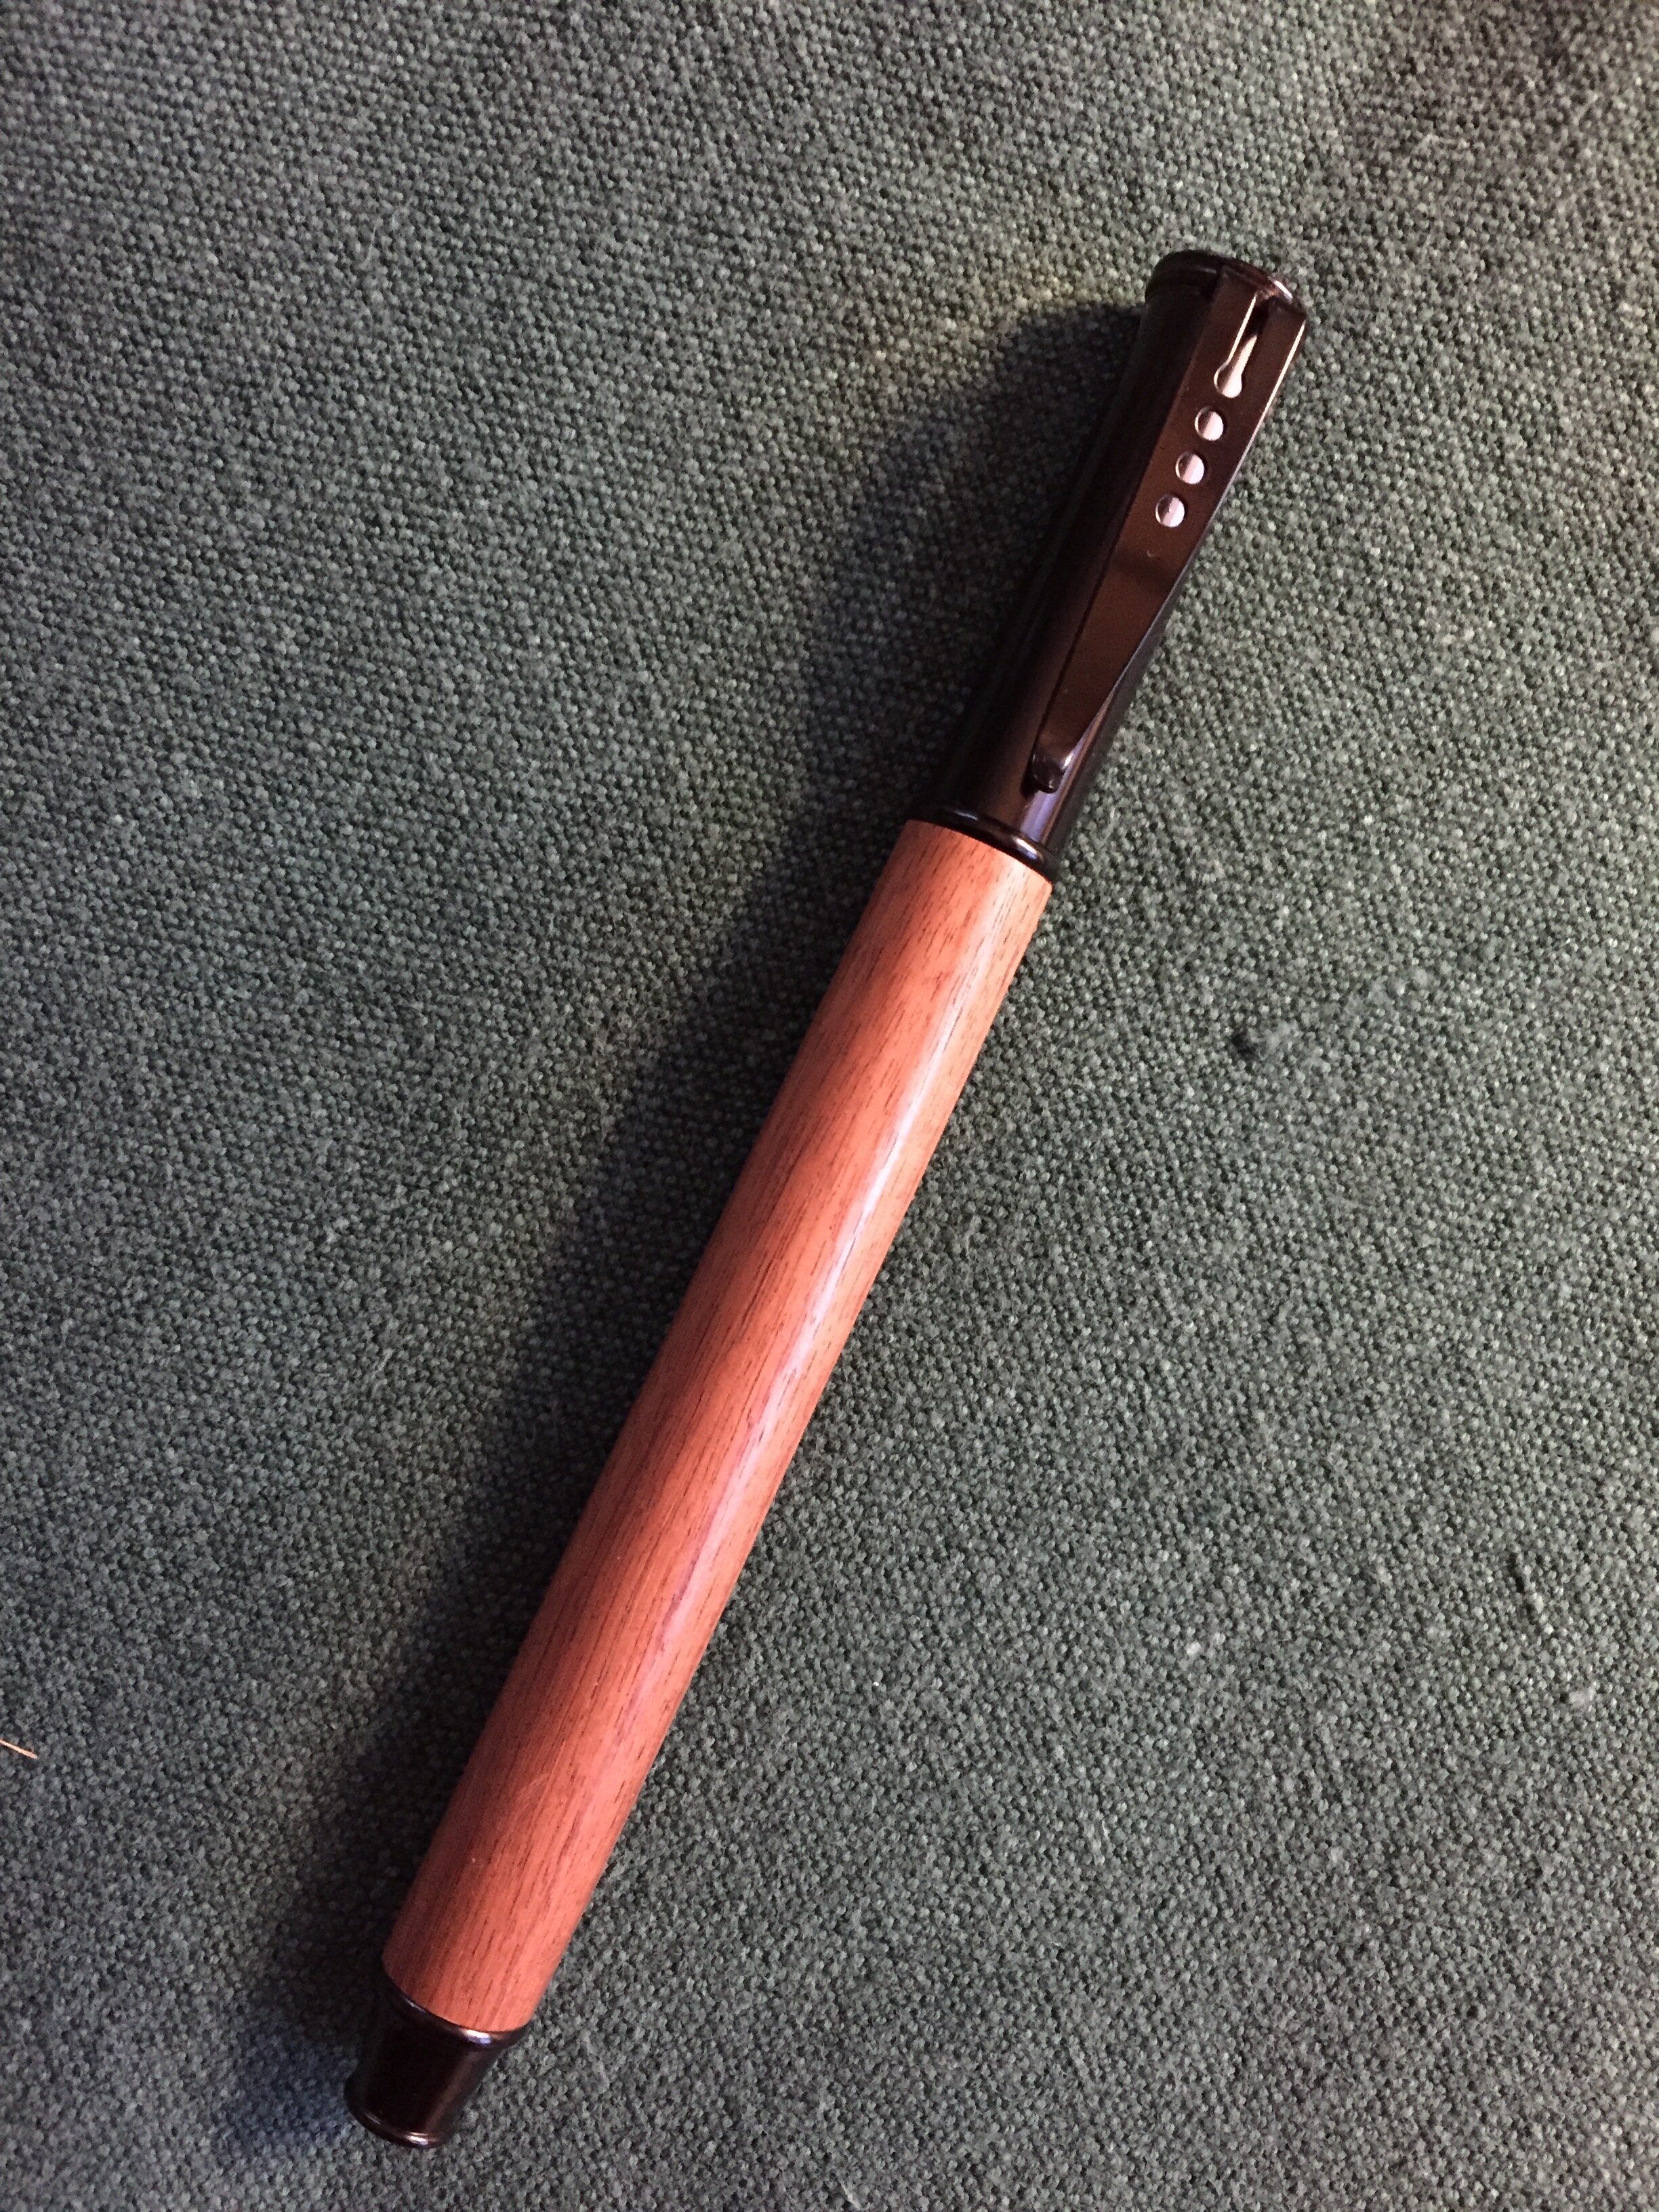 Snap cap rollerball in black chrome and Brazilian Rosewood